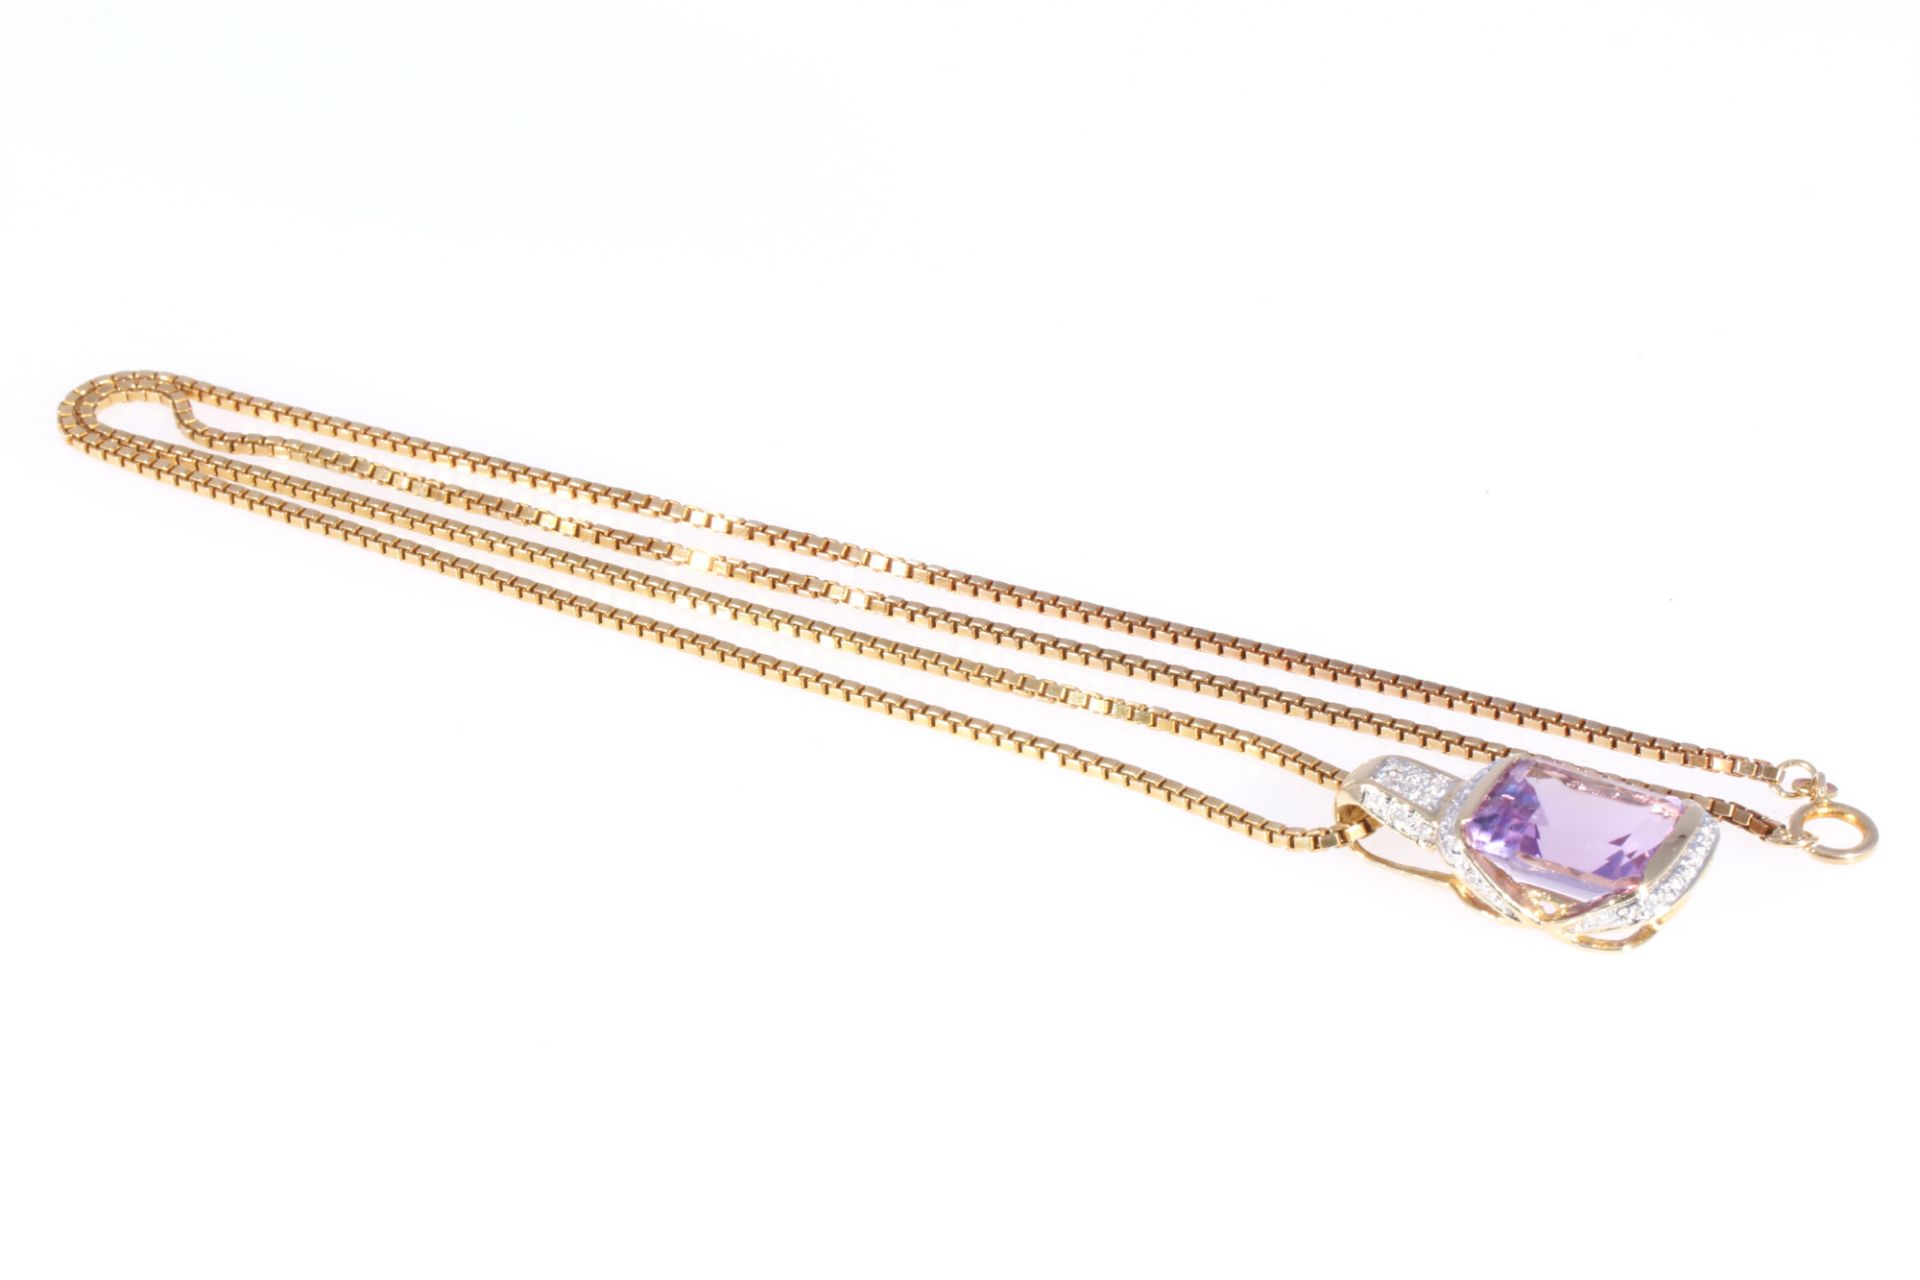 585 gold amethyst pendant with diamonds and 585 gold chain, 14K Gold Anhänger Amethyst mit Brillante - Image 4 of 6